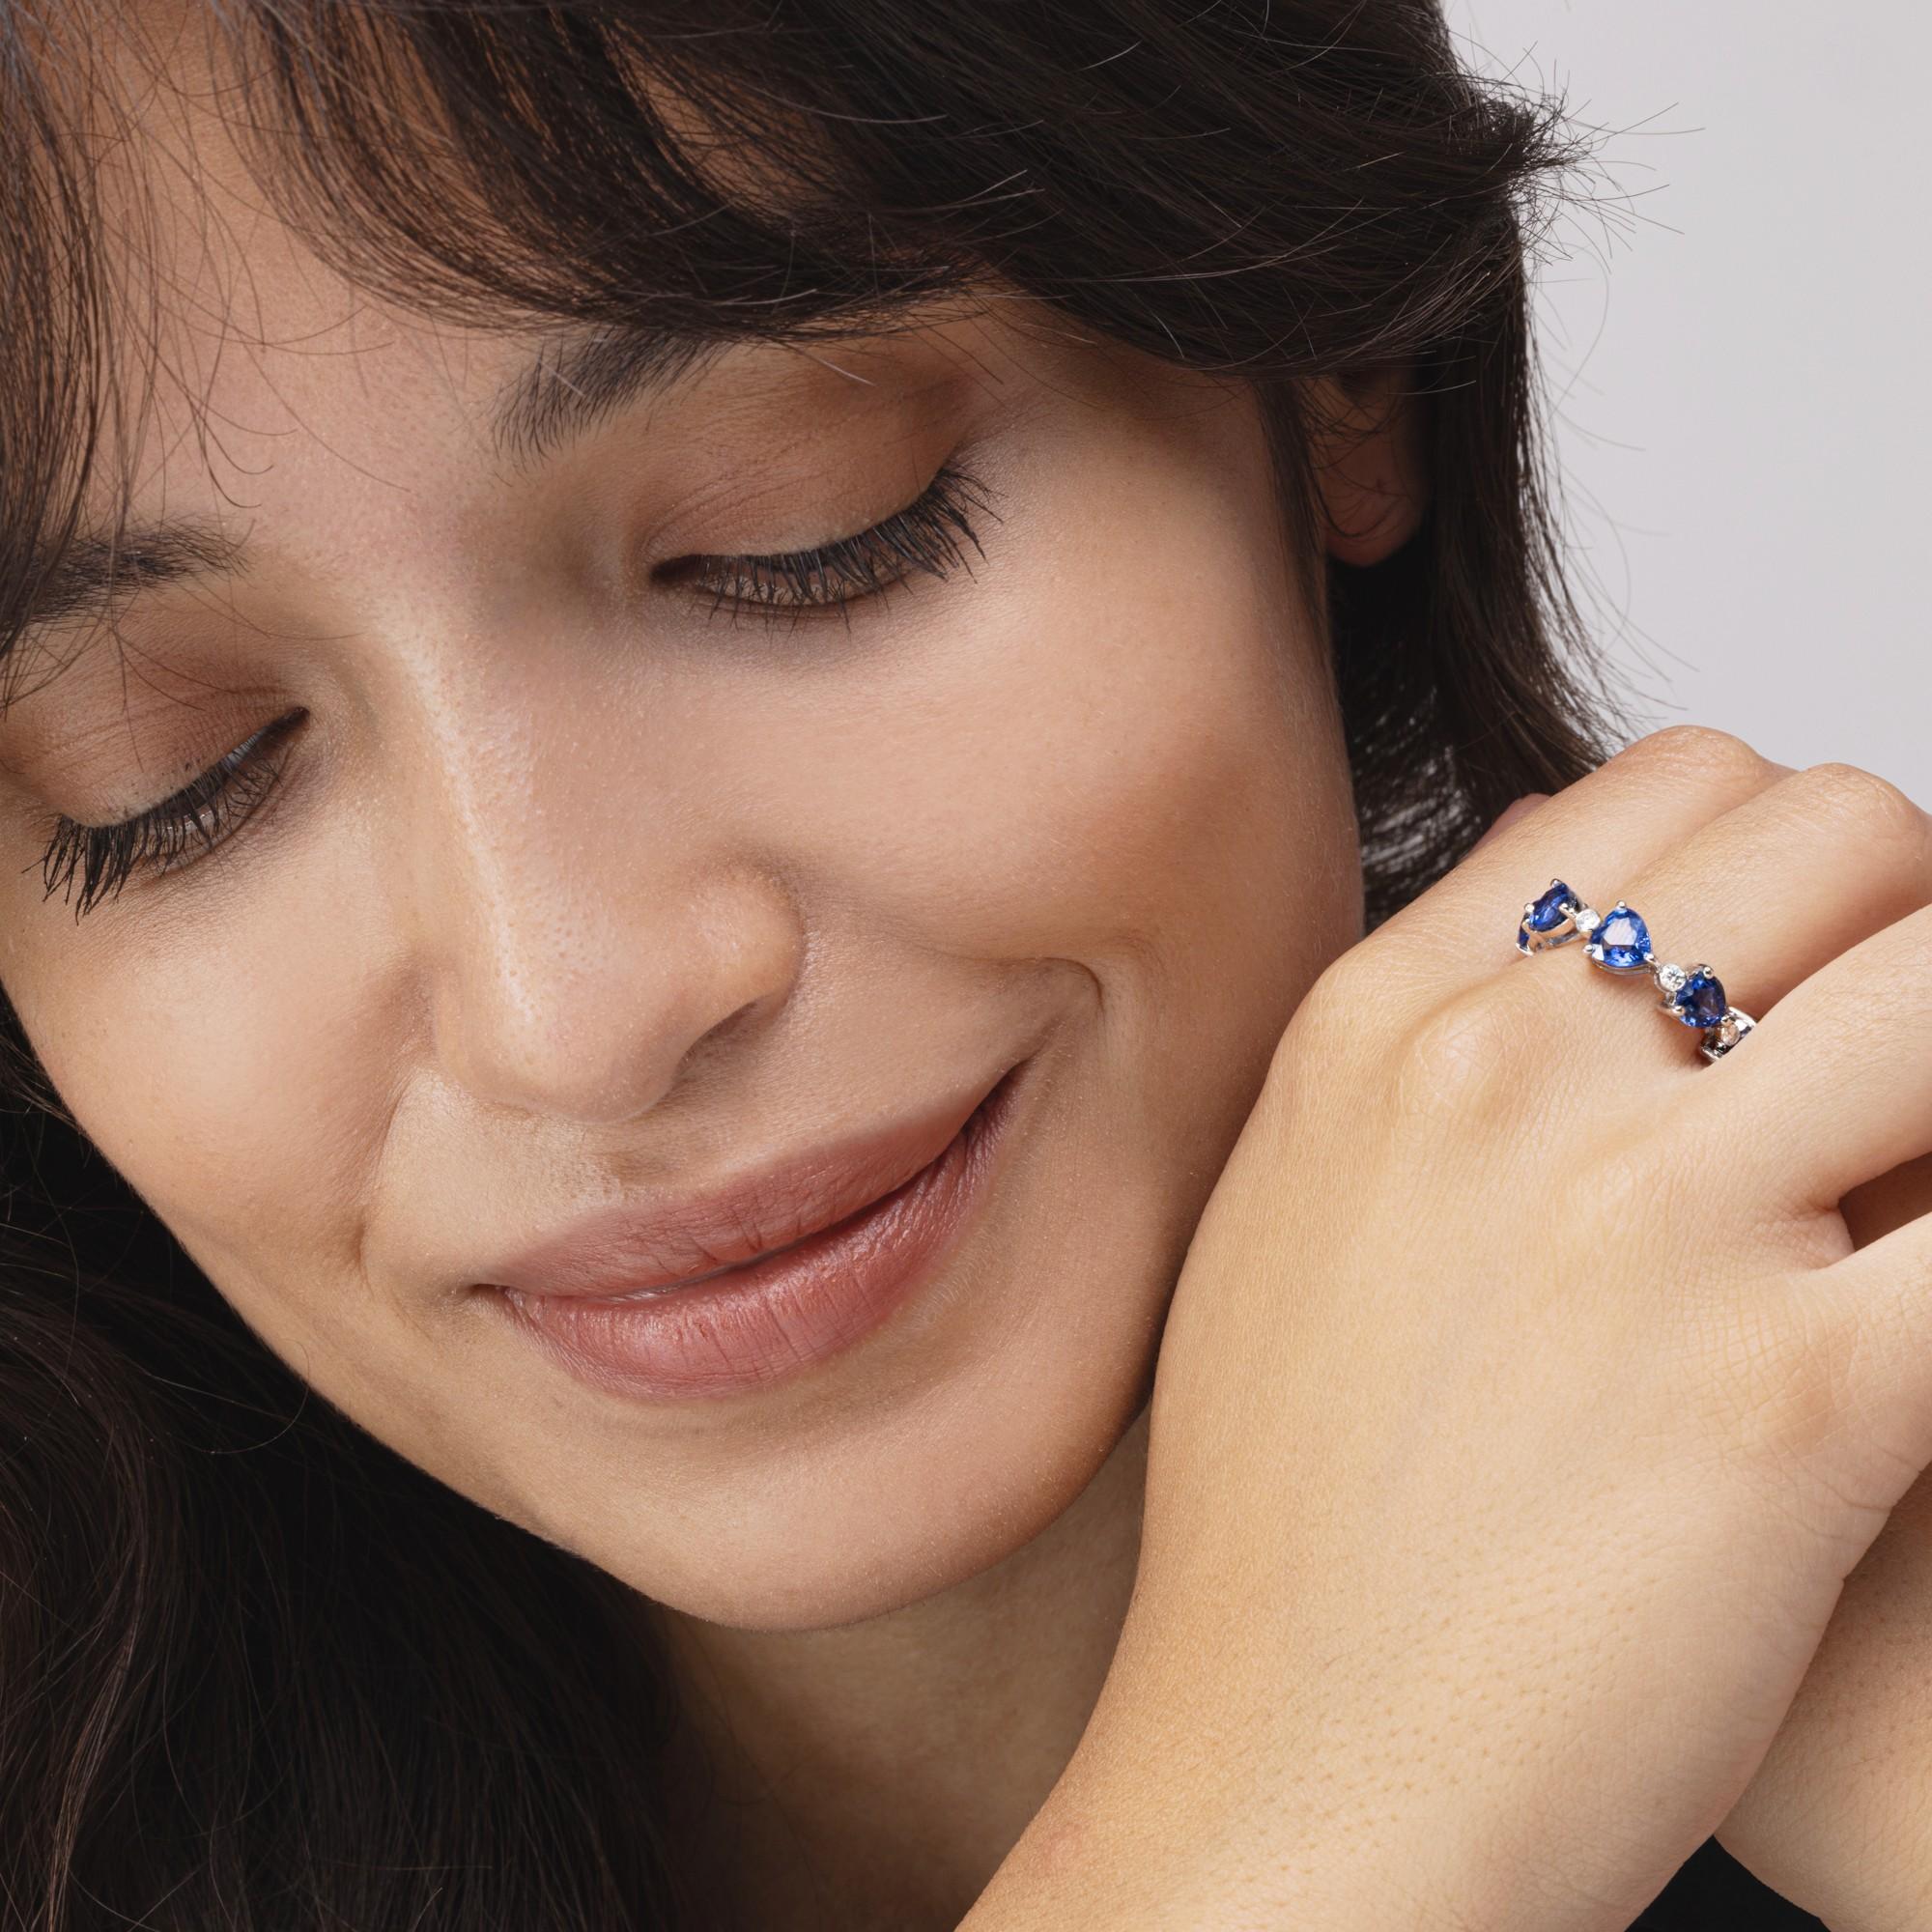 Alex Jona design collection, hand crafted in Italy, 18 karat white gold eternity band ring, set with 9 heart cut blue sapphires weighing 5.25 total carats,  alternating  9 round cut white diamonds of total carats 0.27.

Alex Jona jewels stand out,